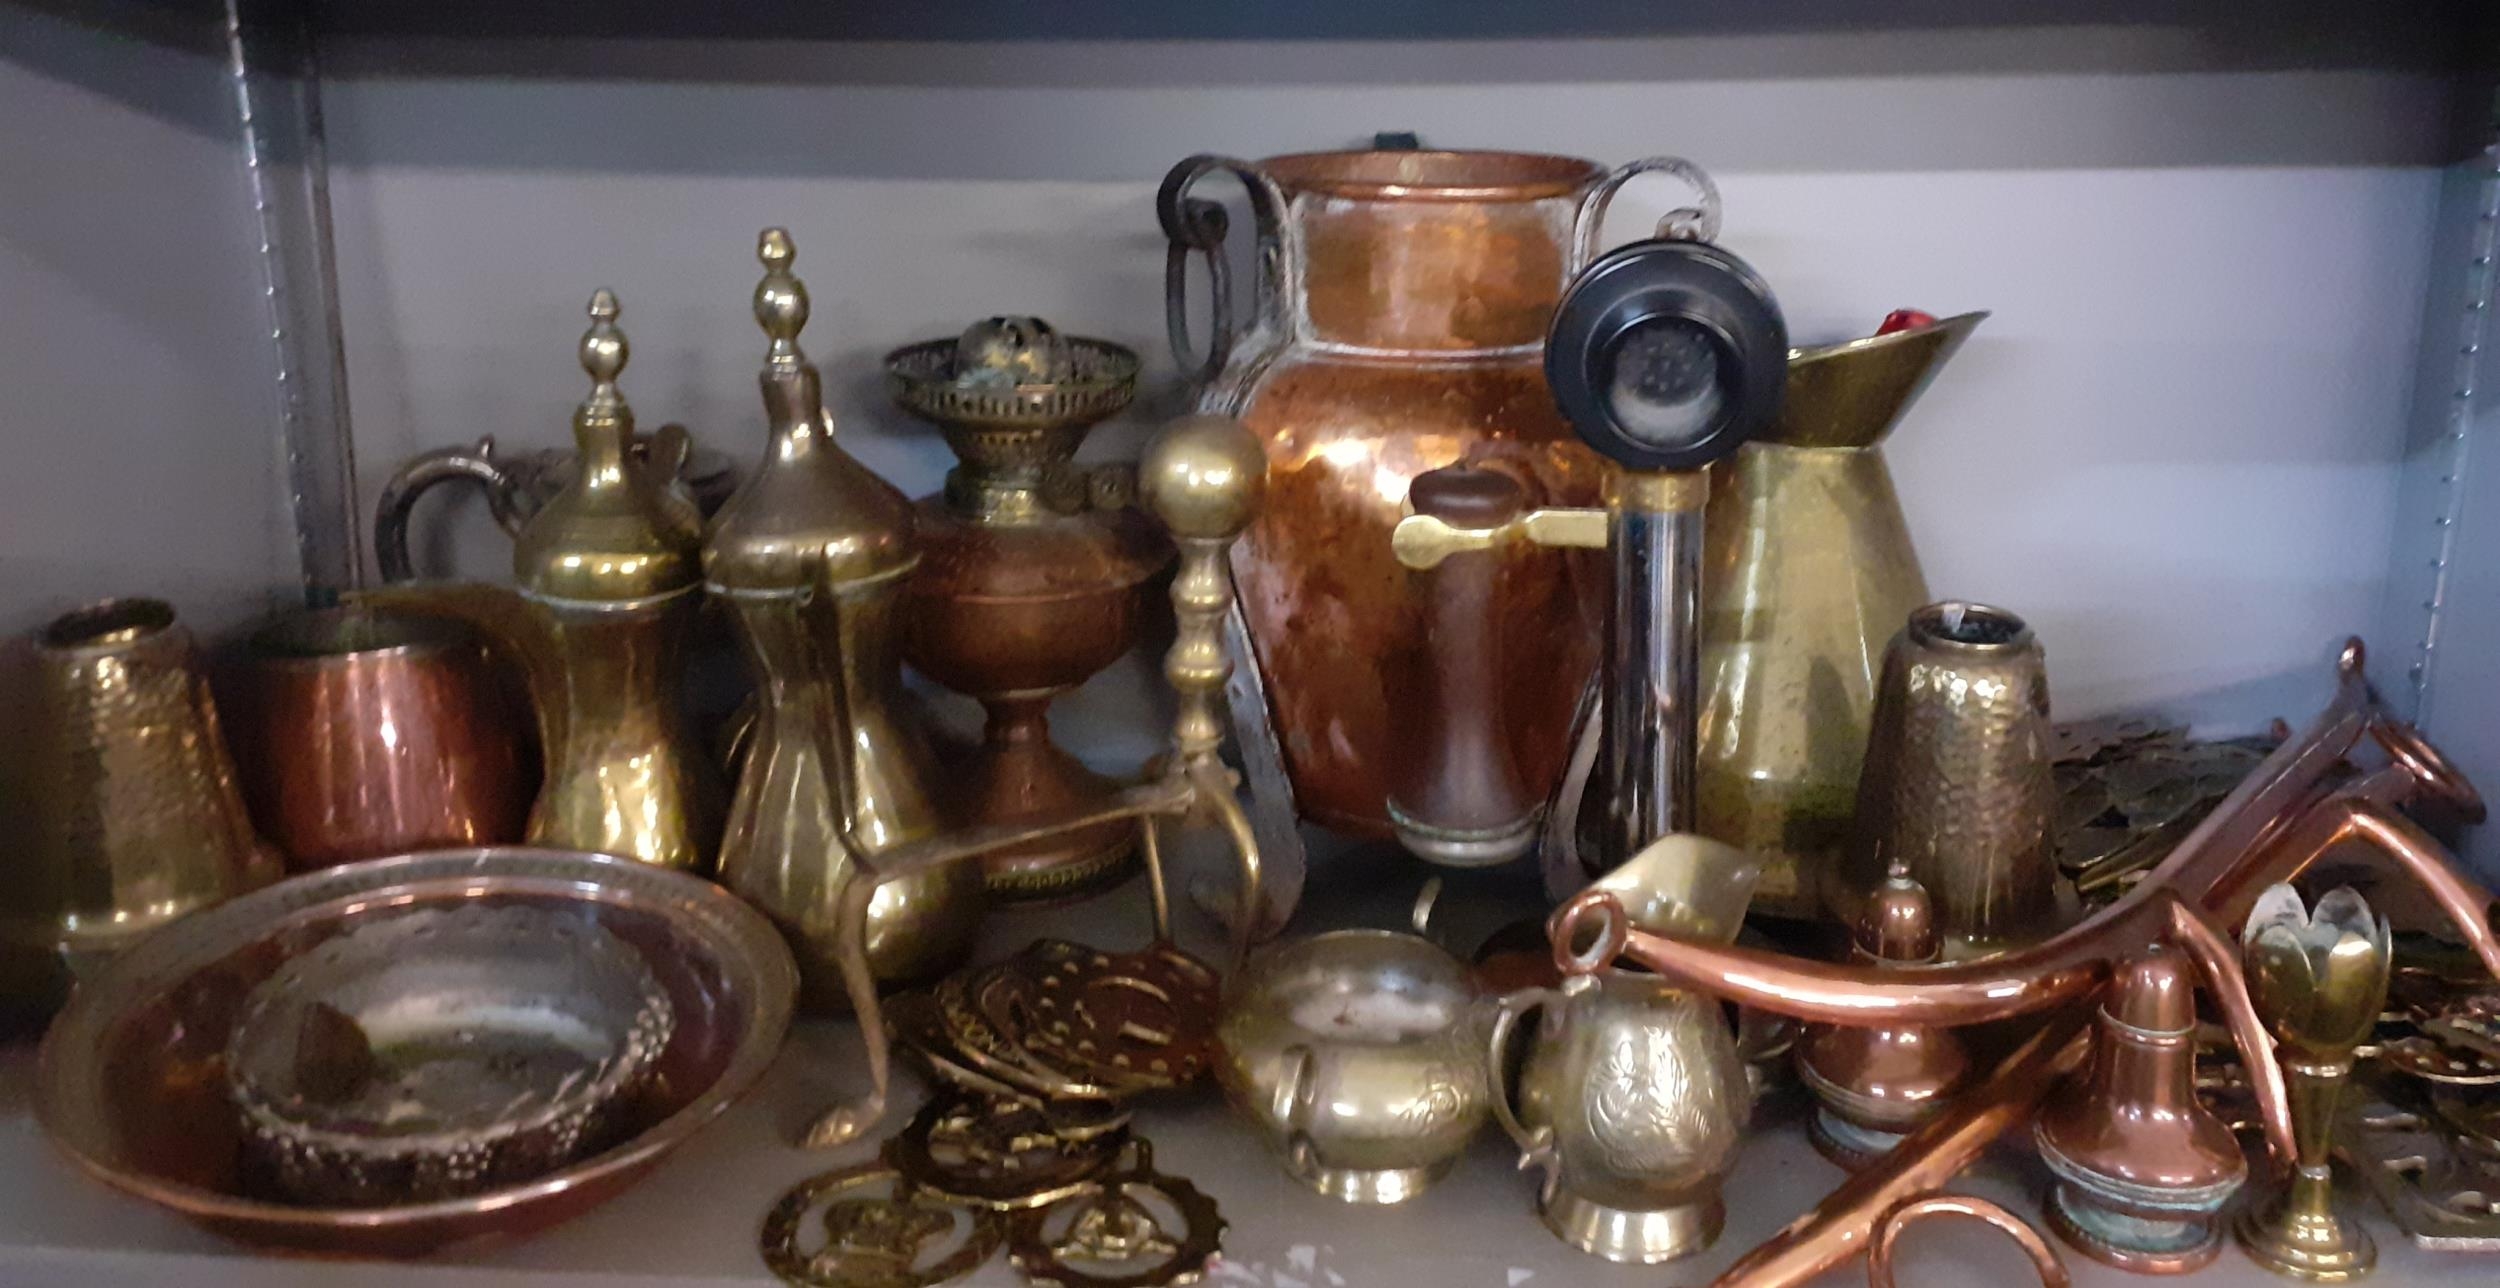 A quantity of copper and brass to include Turkish coffee pots, horse brasses and a vintage upright